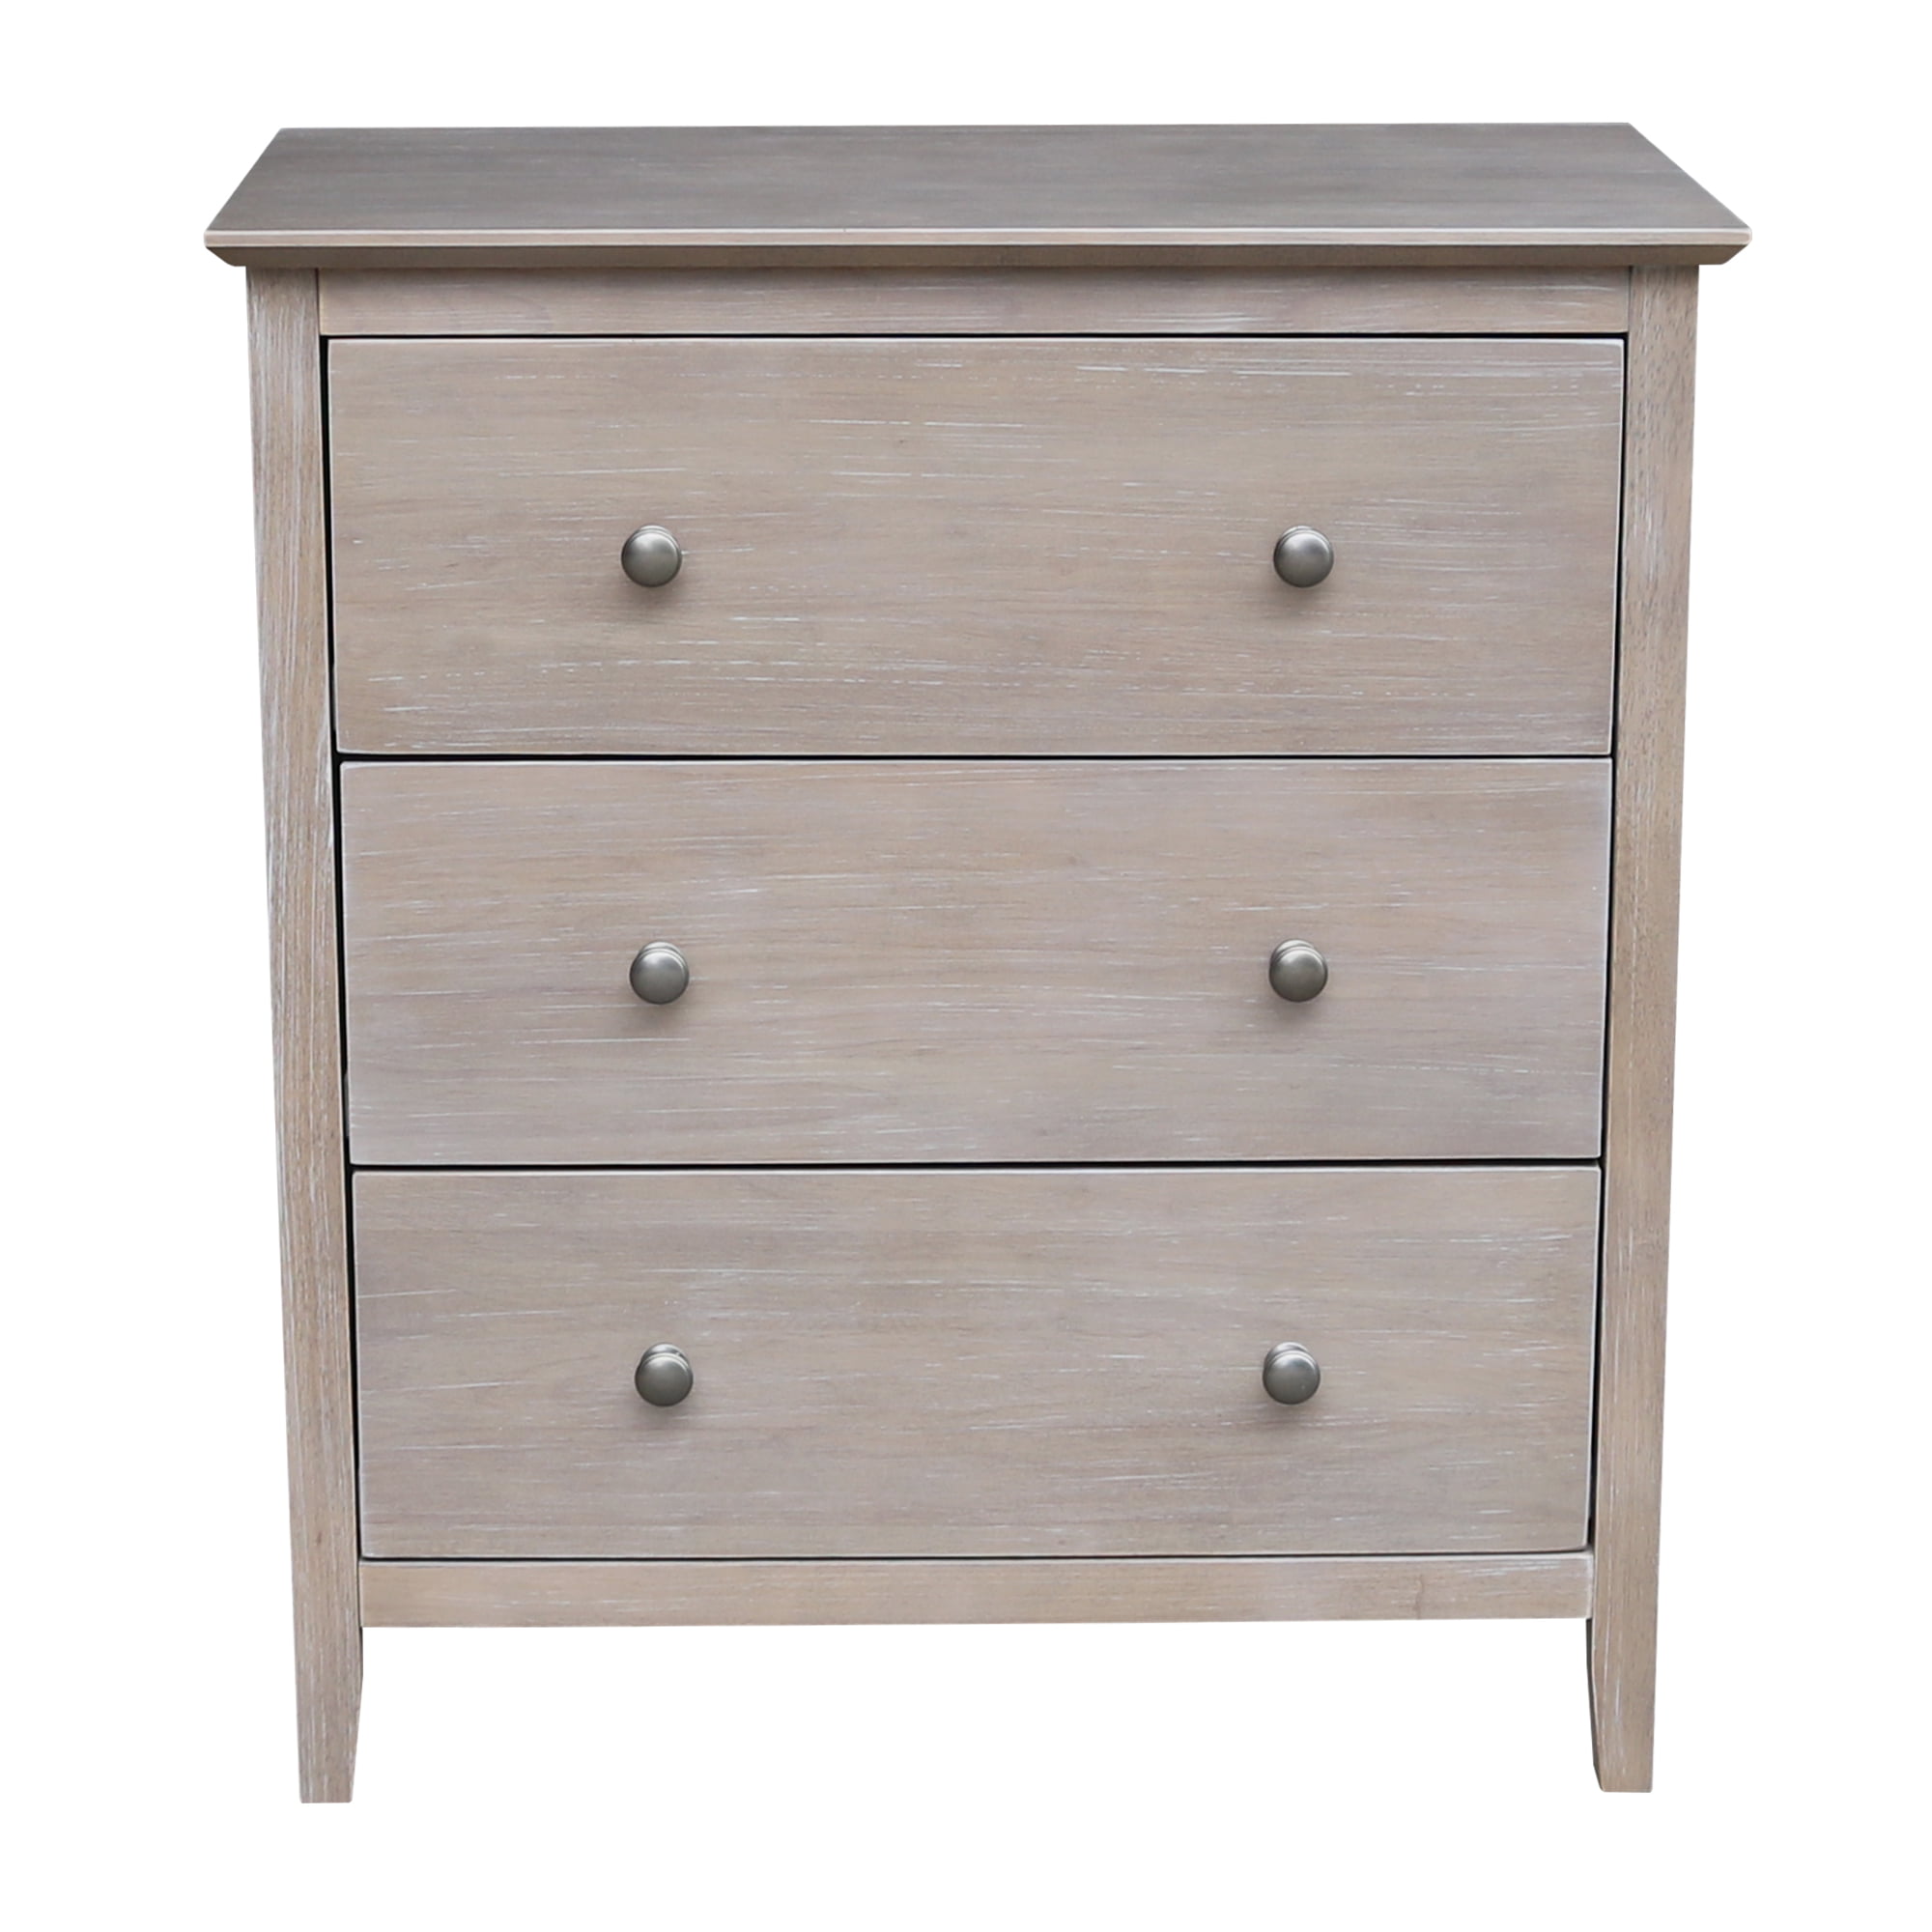 Chest with 3 Drawers - Washed Gray Taupe - Walmart.com